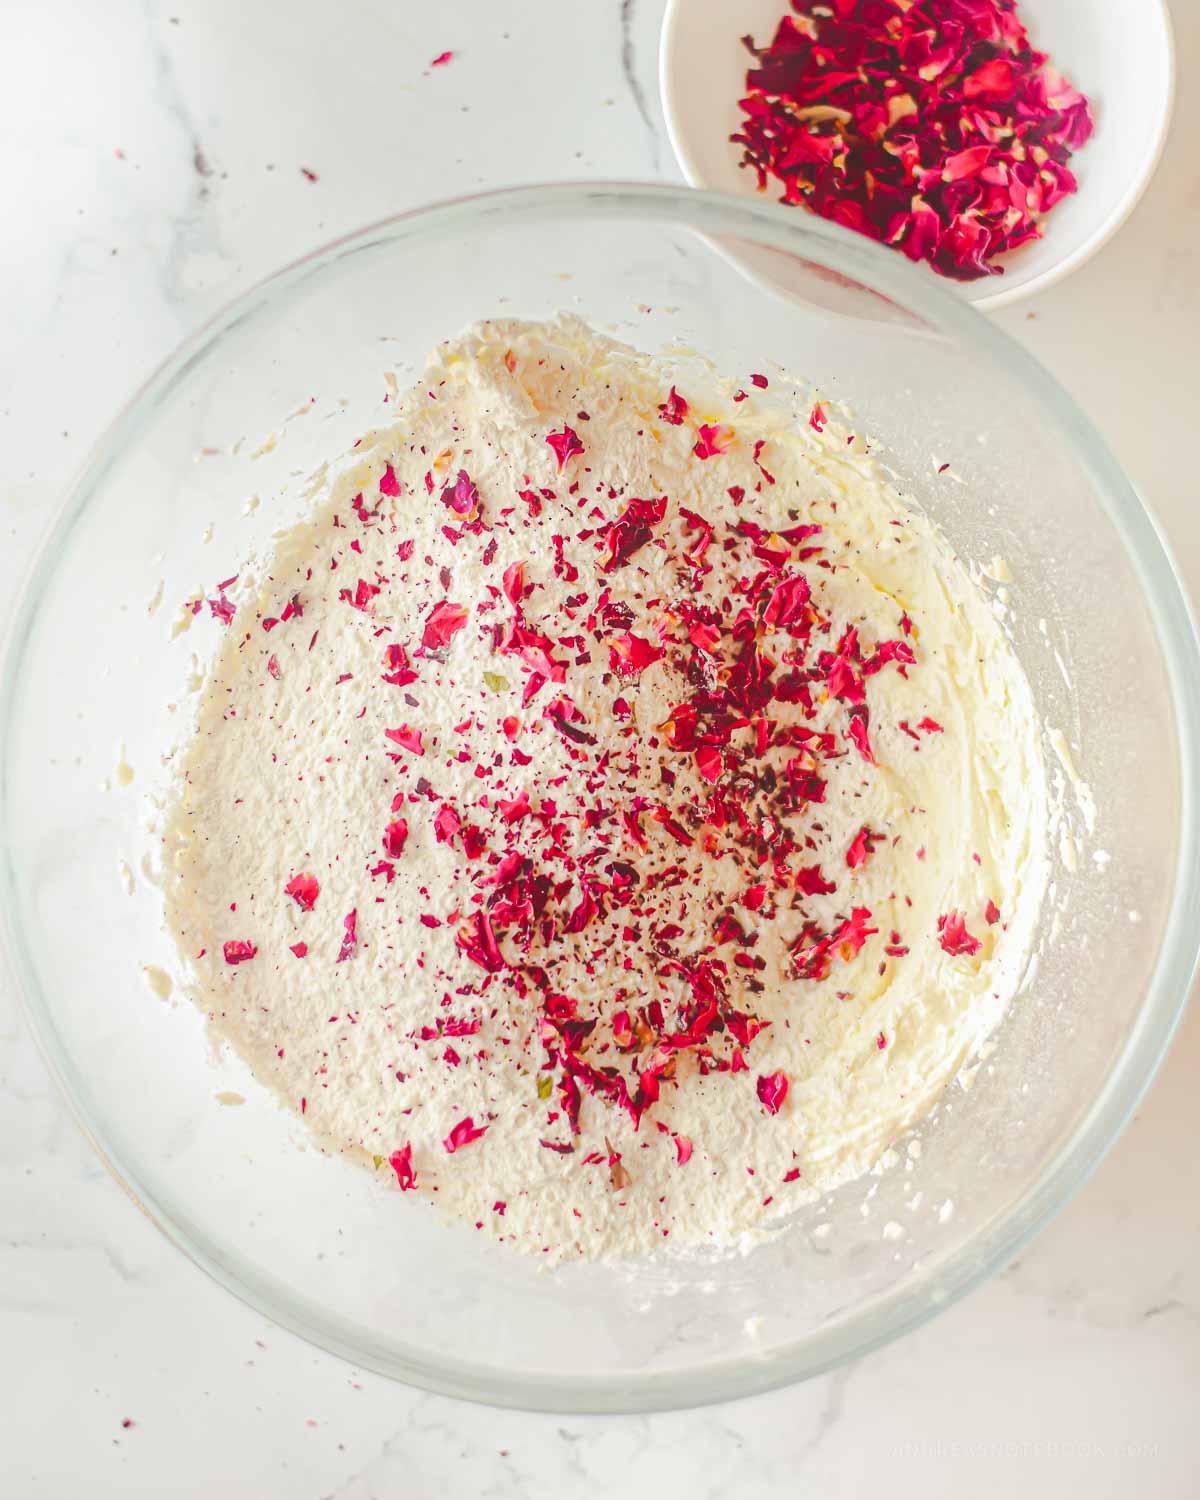 Large bowl with shortbread dough and rose petals sprinkled on top.